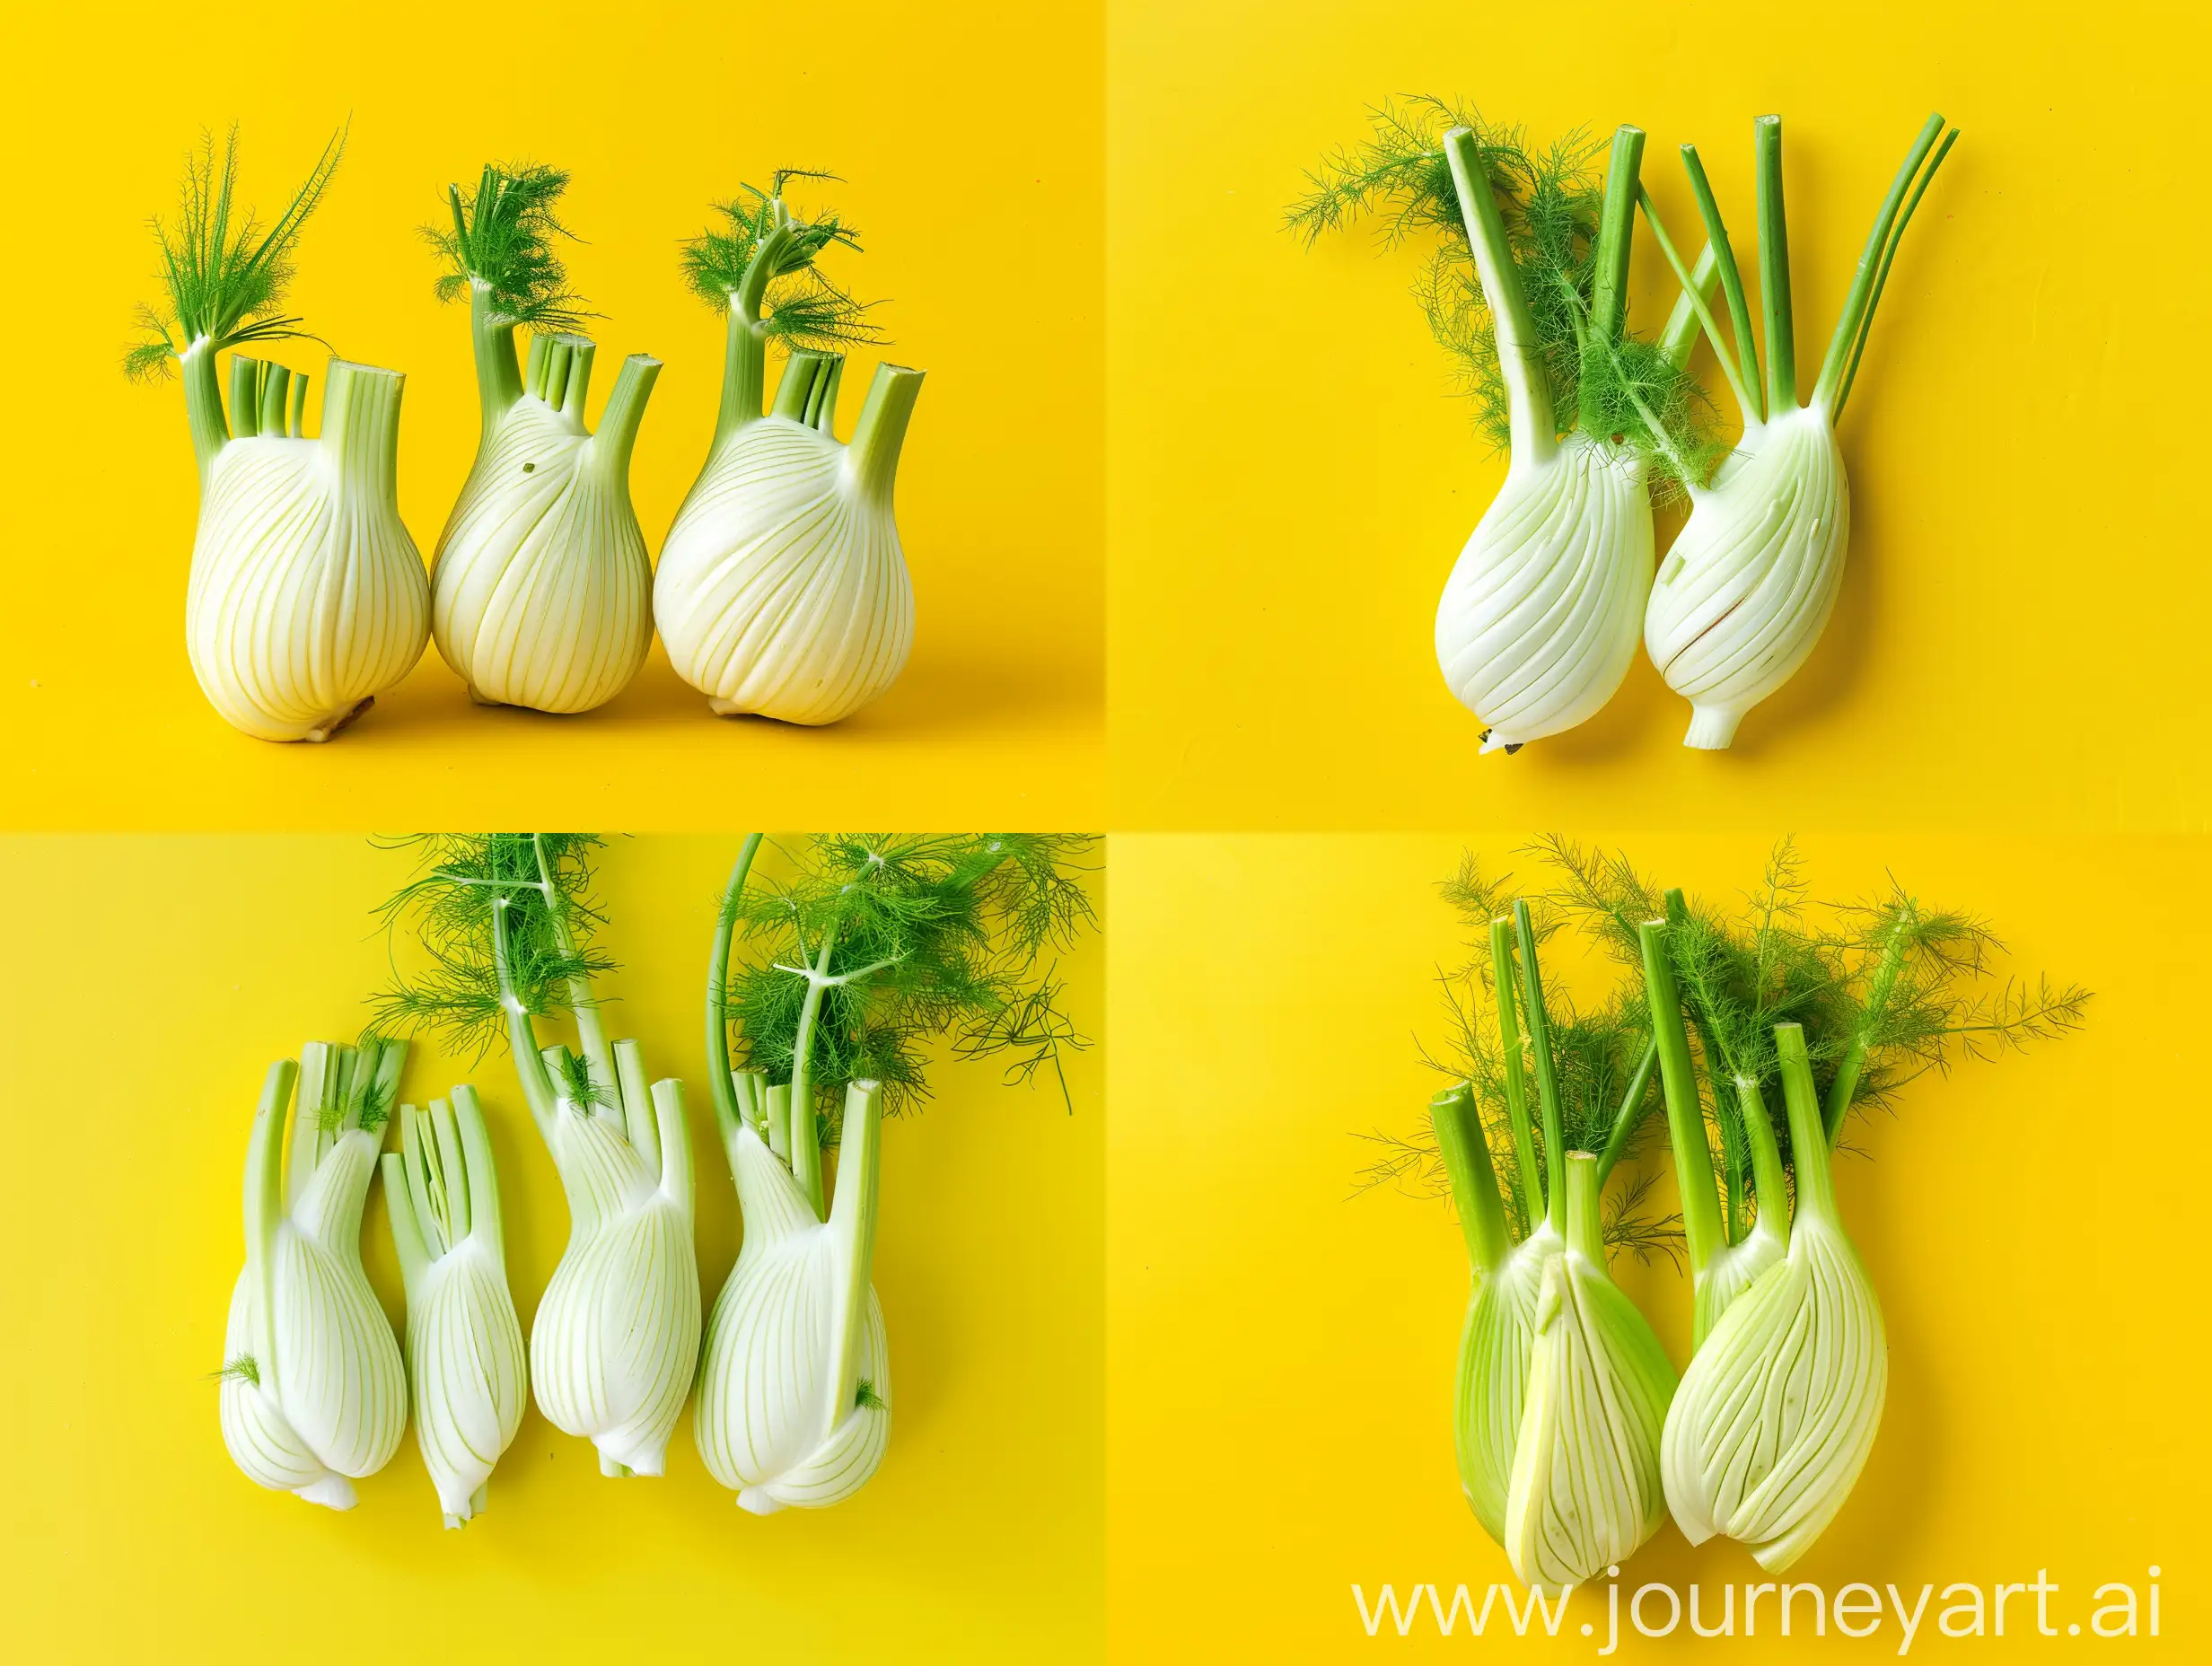 Studio photography with a bright yellow background of fennel